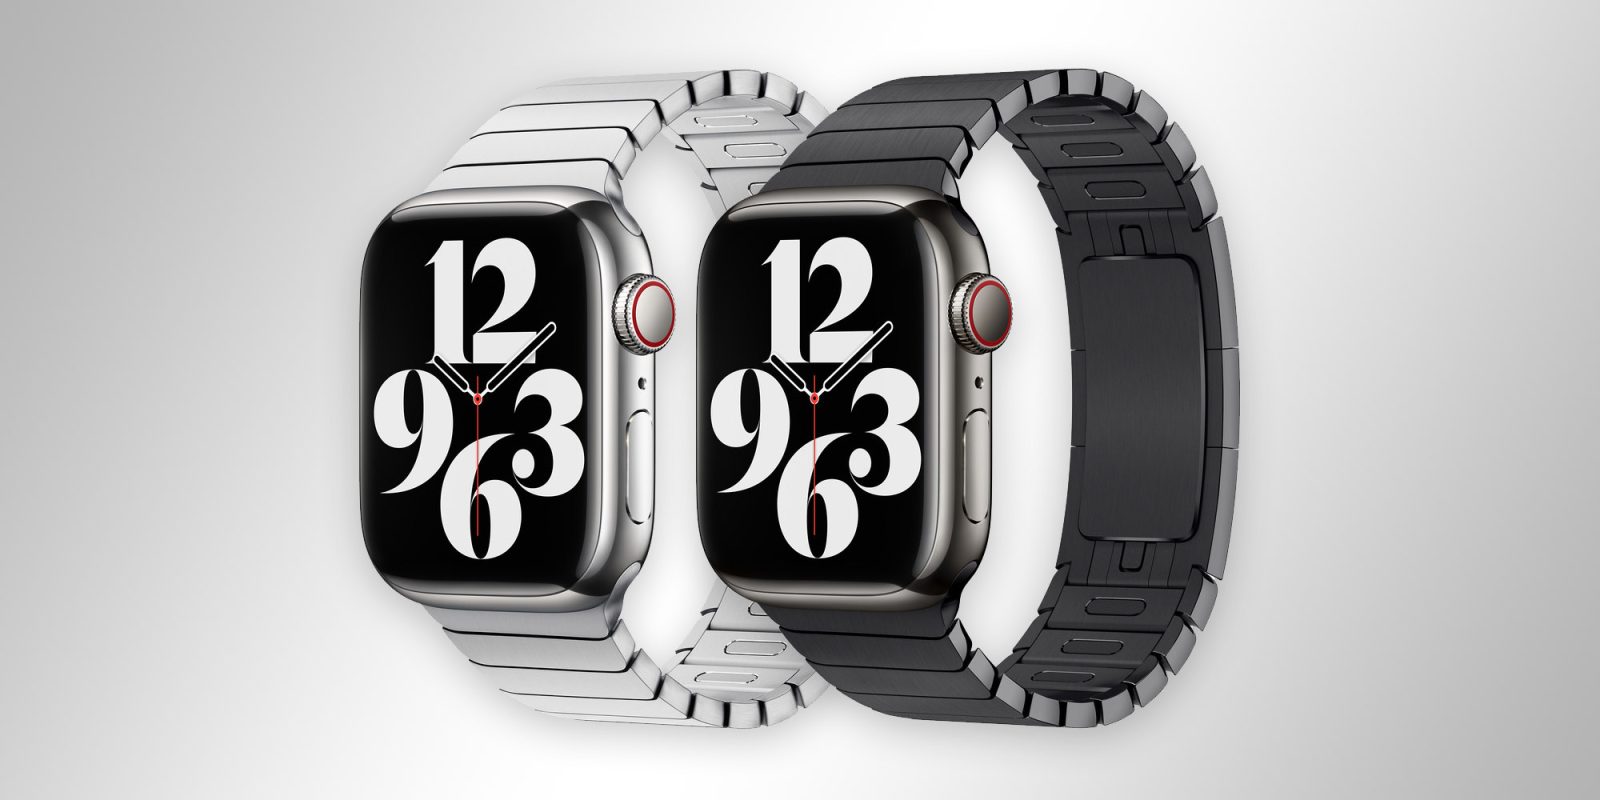 Some of the Apple Watch bands are currently unavailable ahead of Series 9 launch